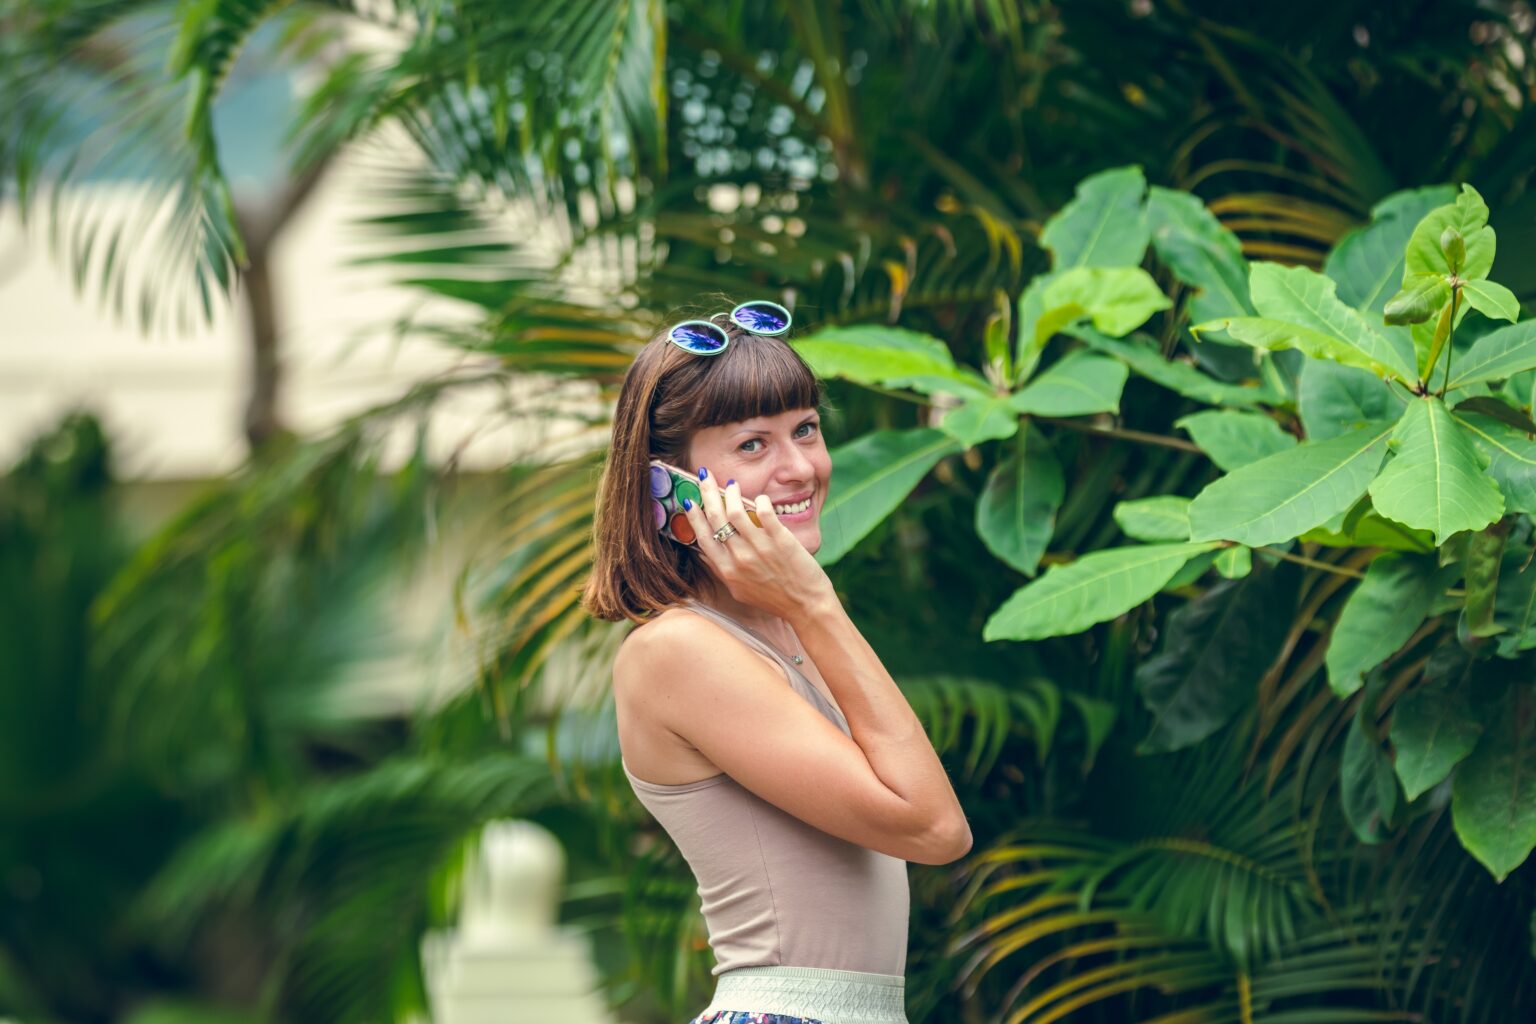 Woman talking on phone in the middle of tropical plants with a hat on